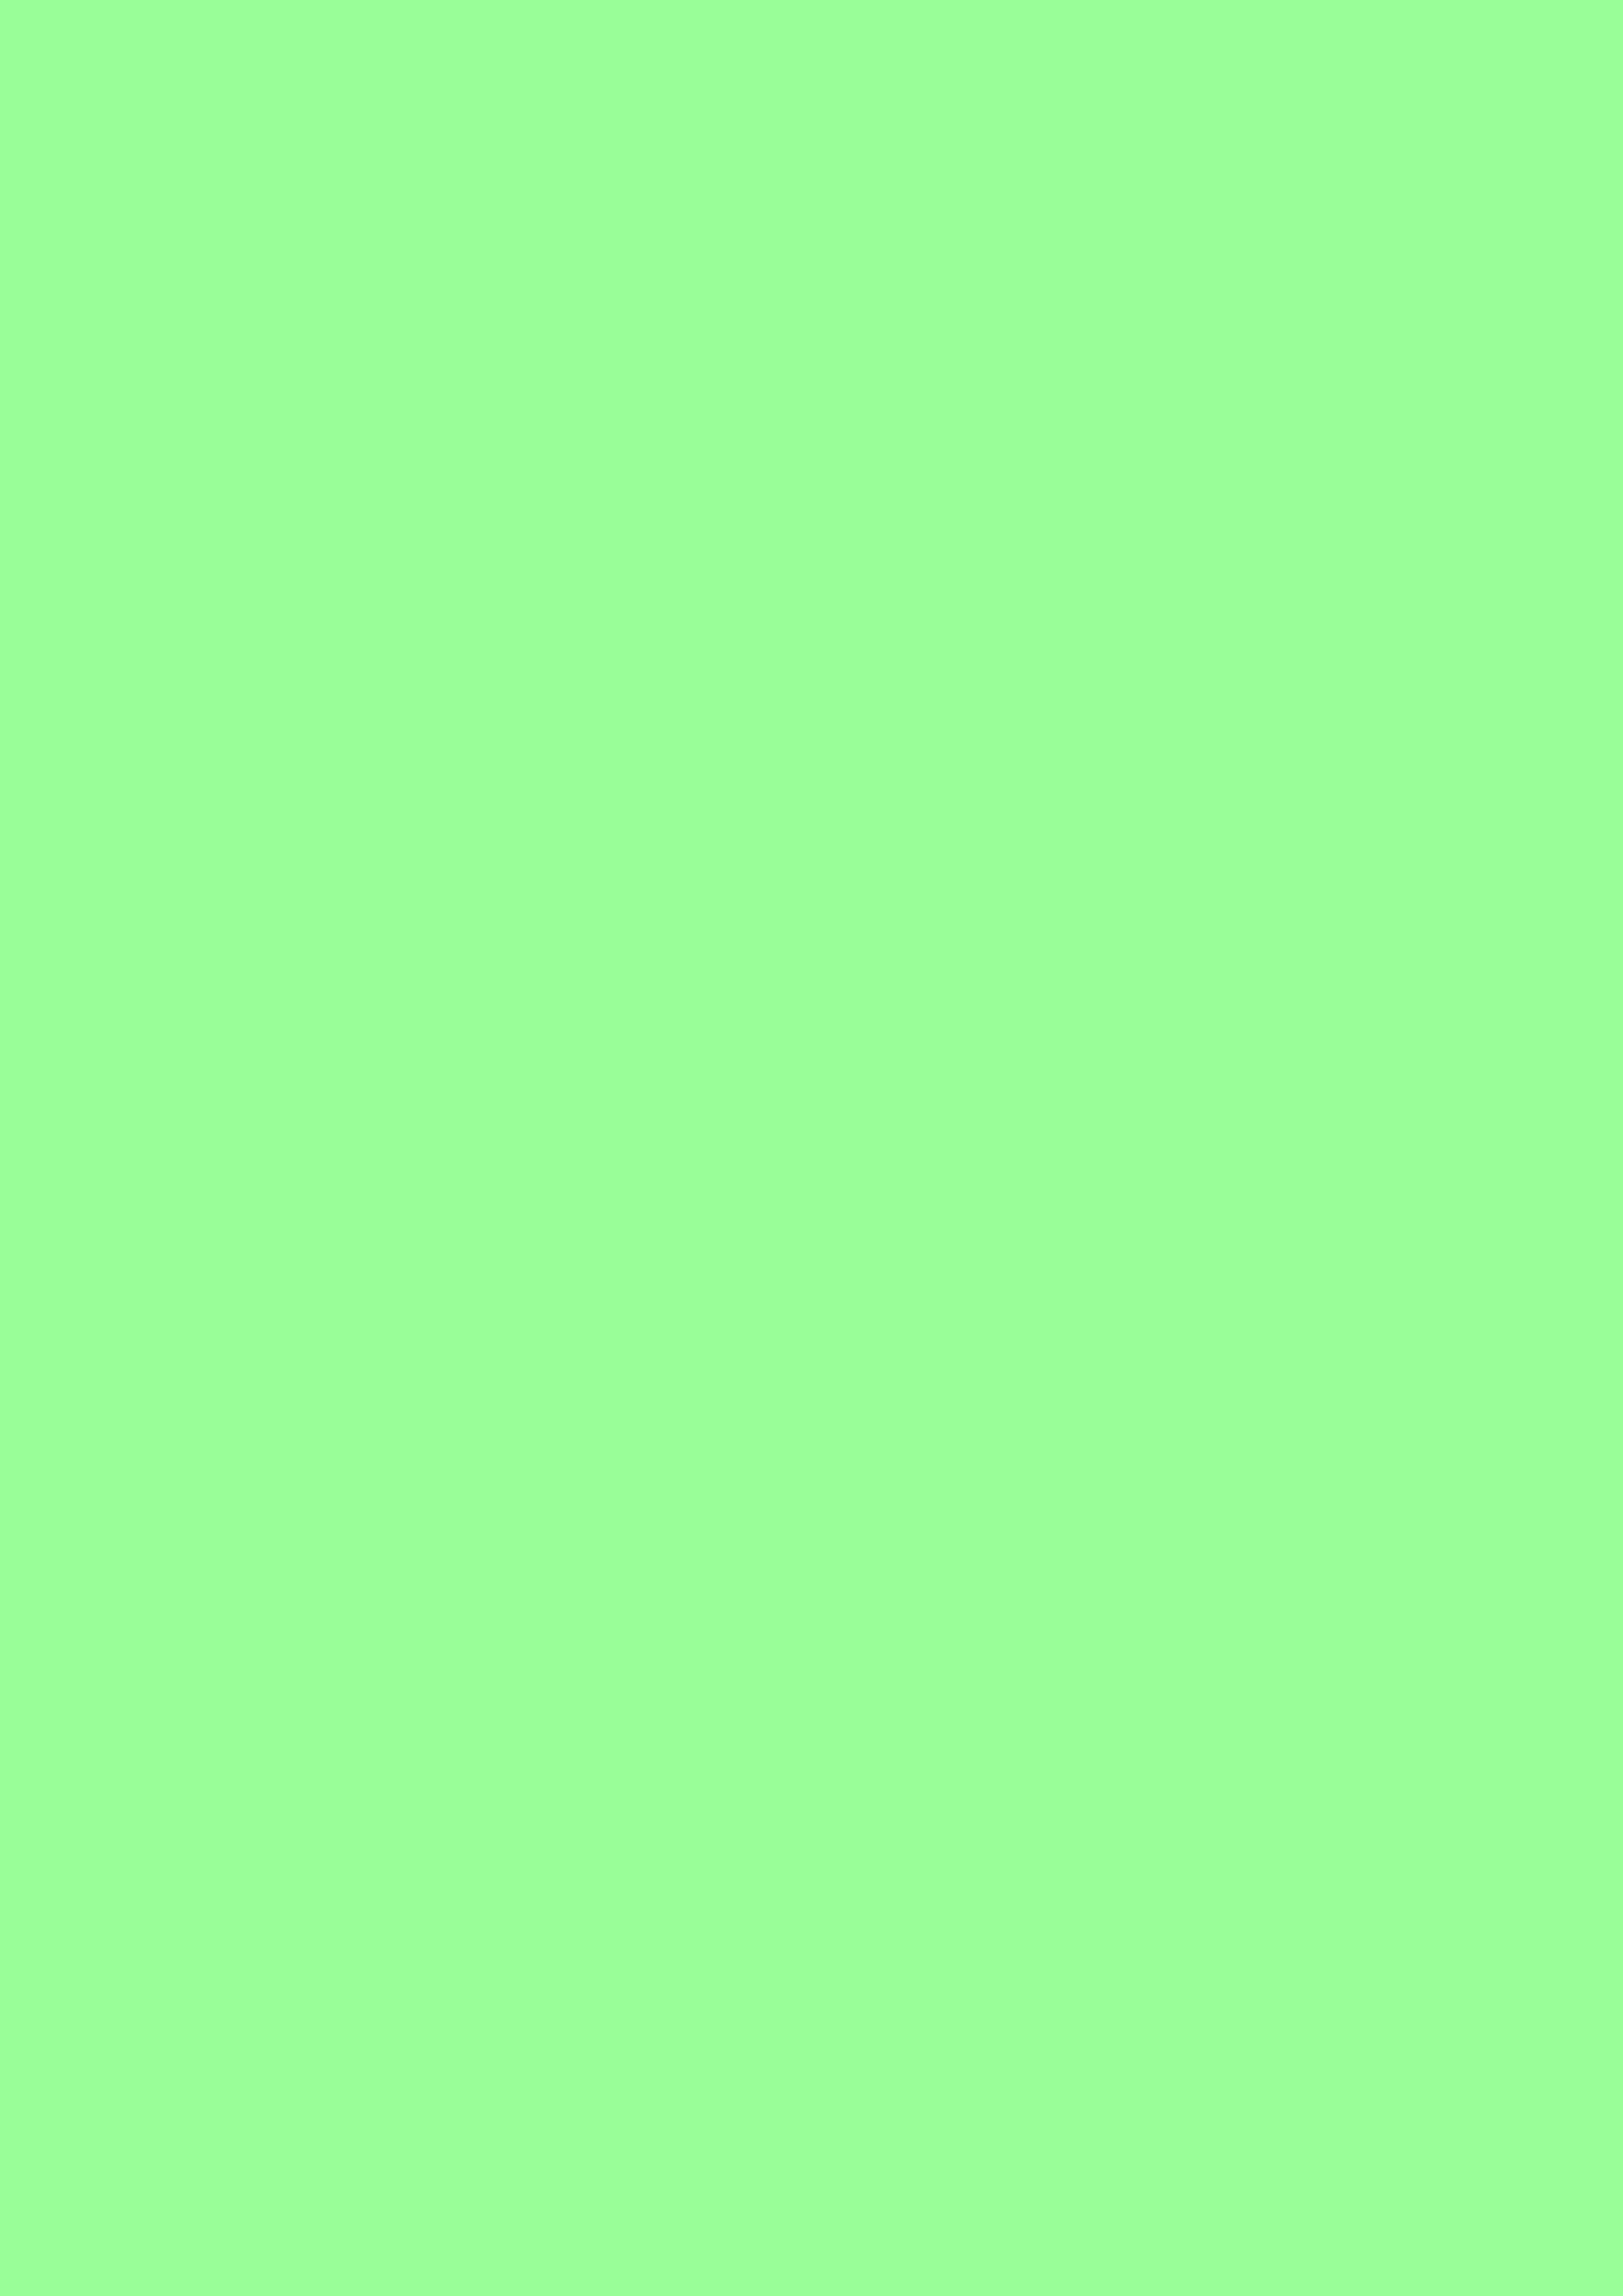 2480x3508 Mint Green Solid Color Background